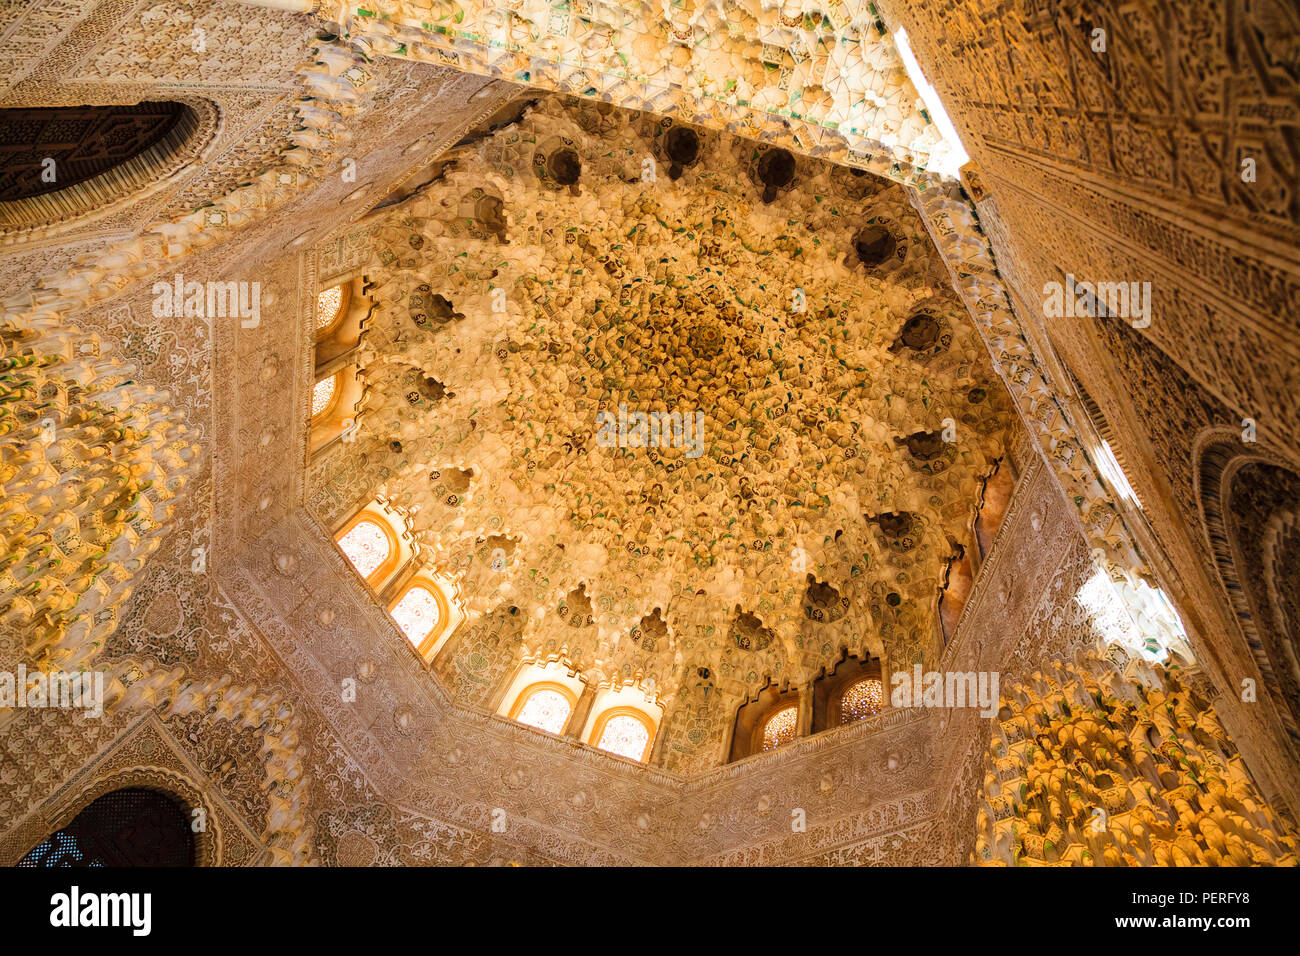 Looking up into ornate and decorative islamic architecture ceiling at the Alhambra Palace in Granada Spain Stock Photo